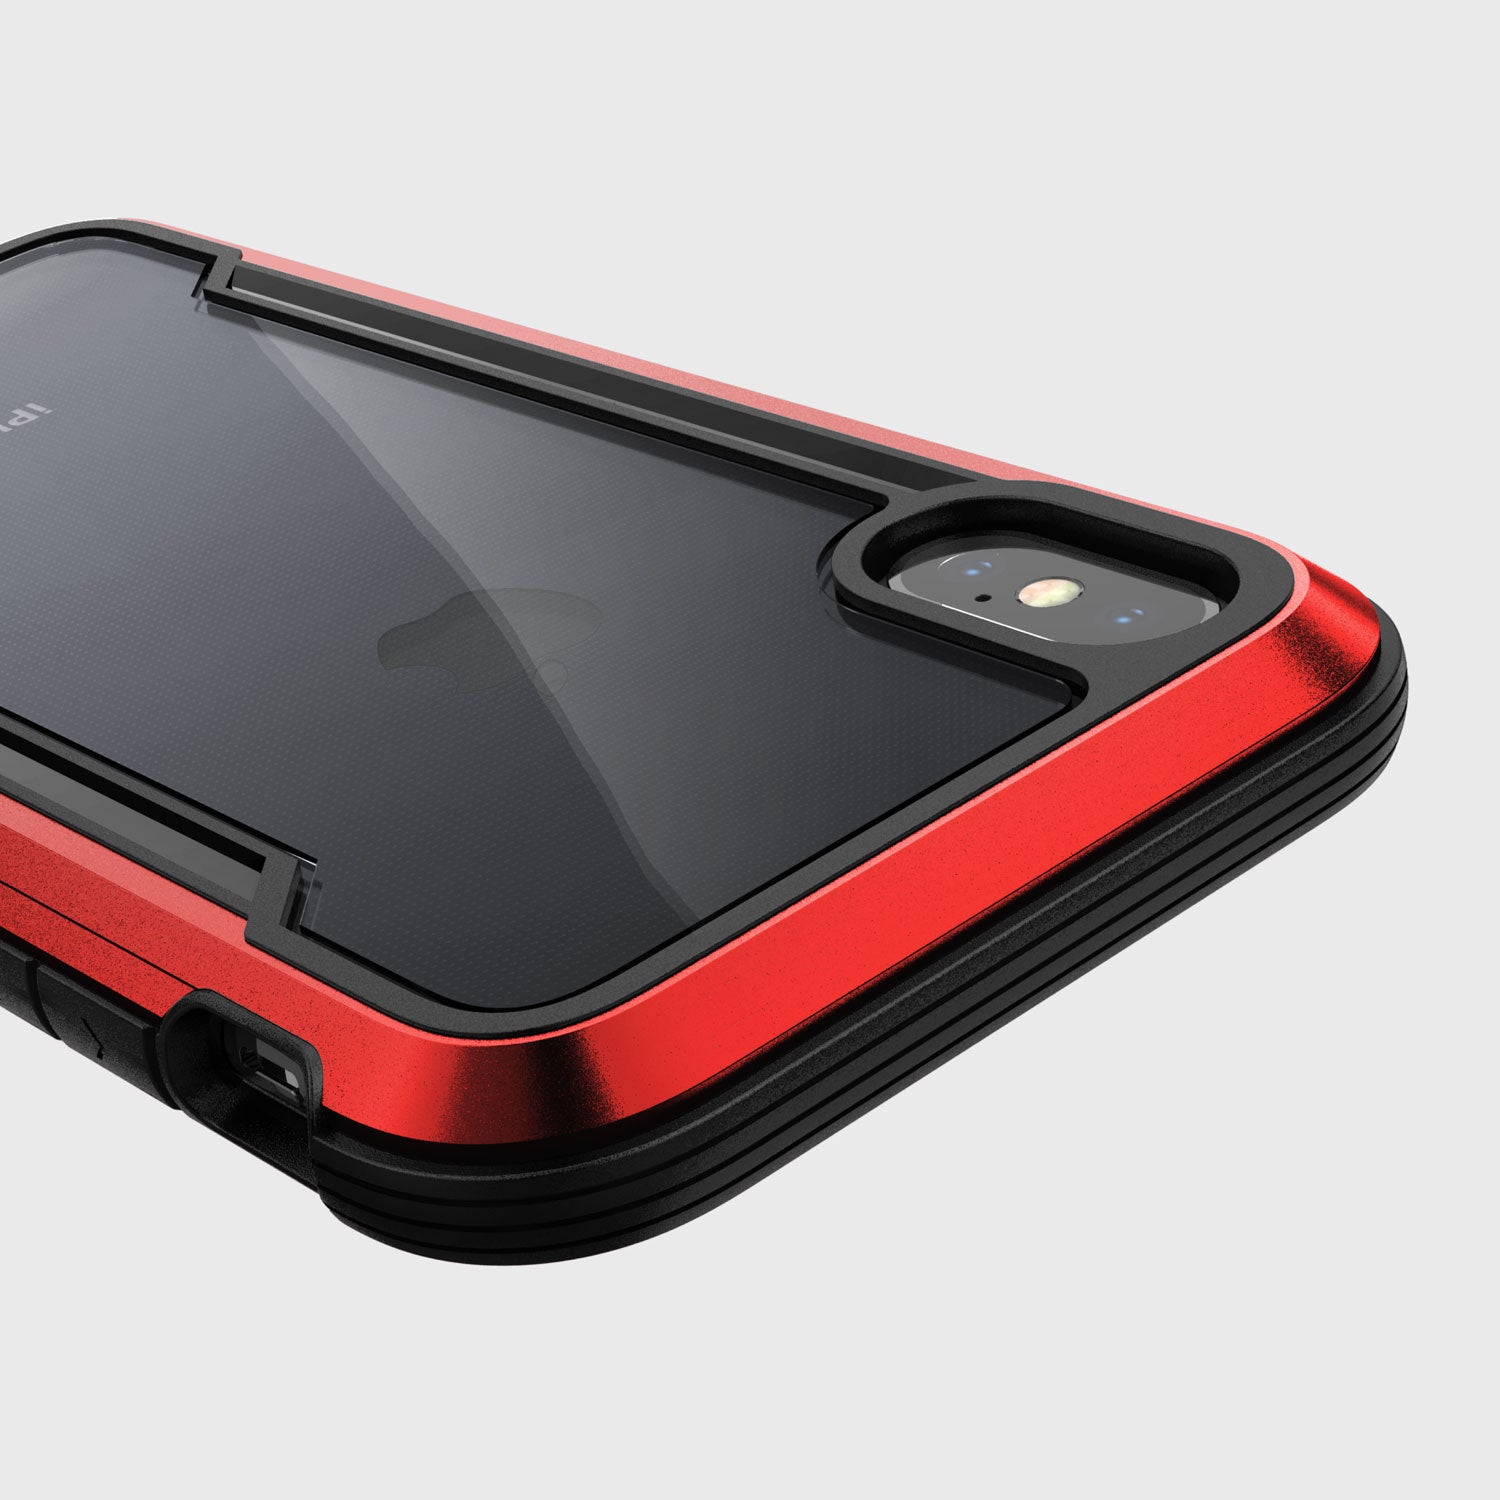 The Raptic SHIELD case for iPhone XS Max provides drop protection in red and black, ensuring the safety of your iPhone X/XS.